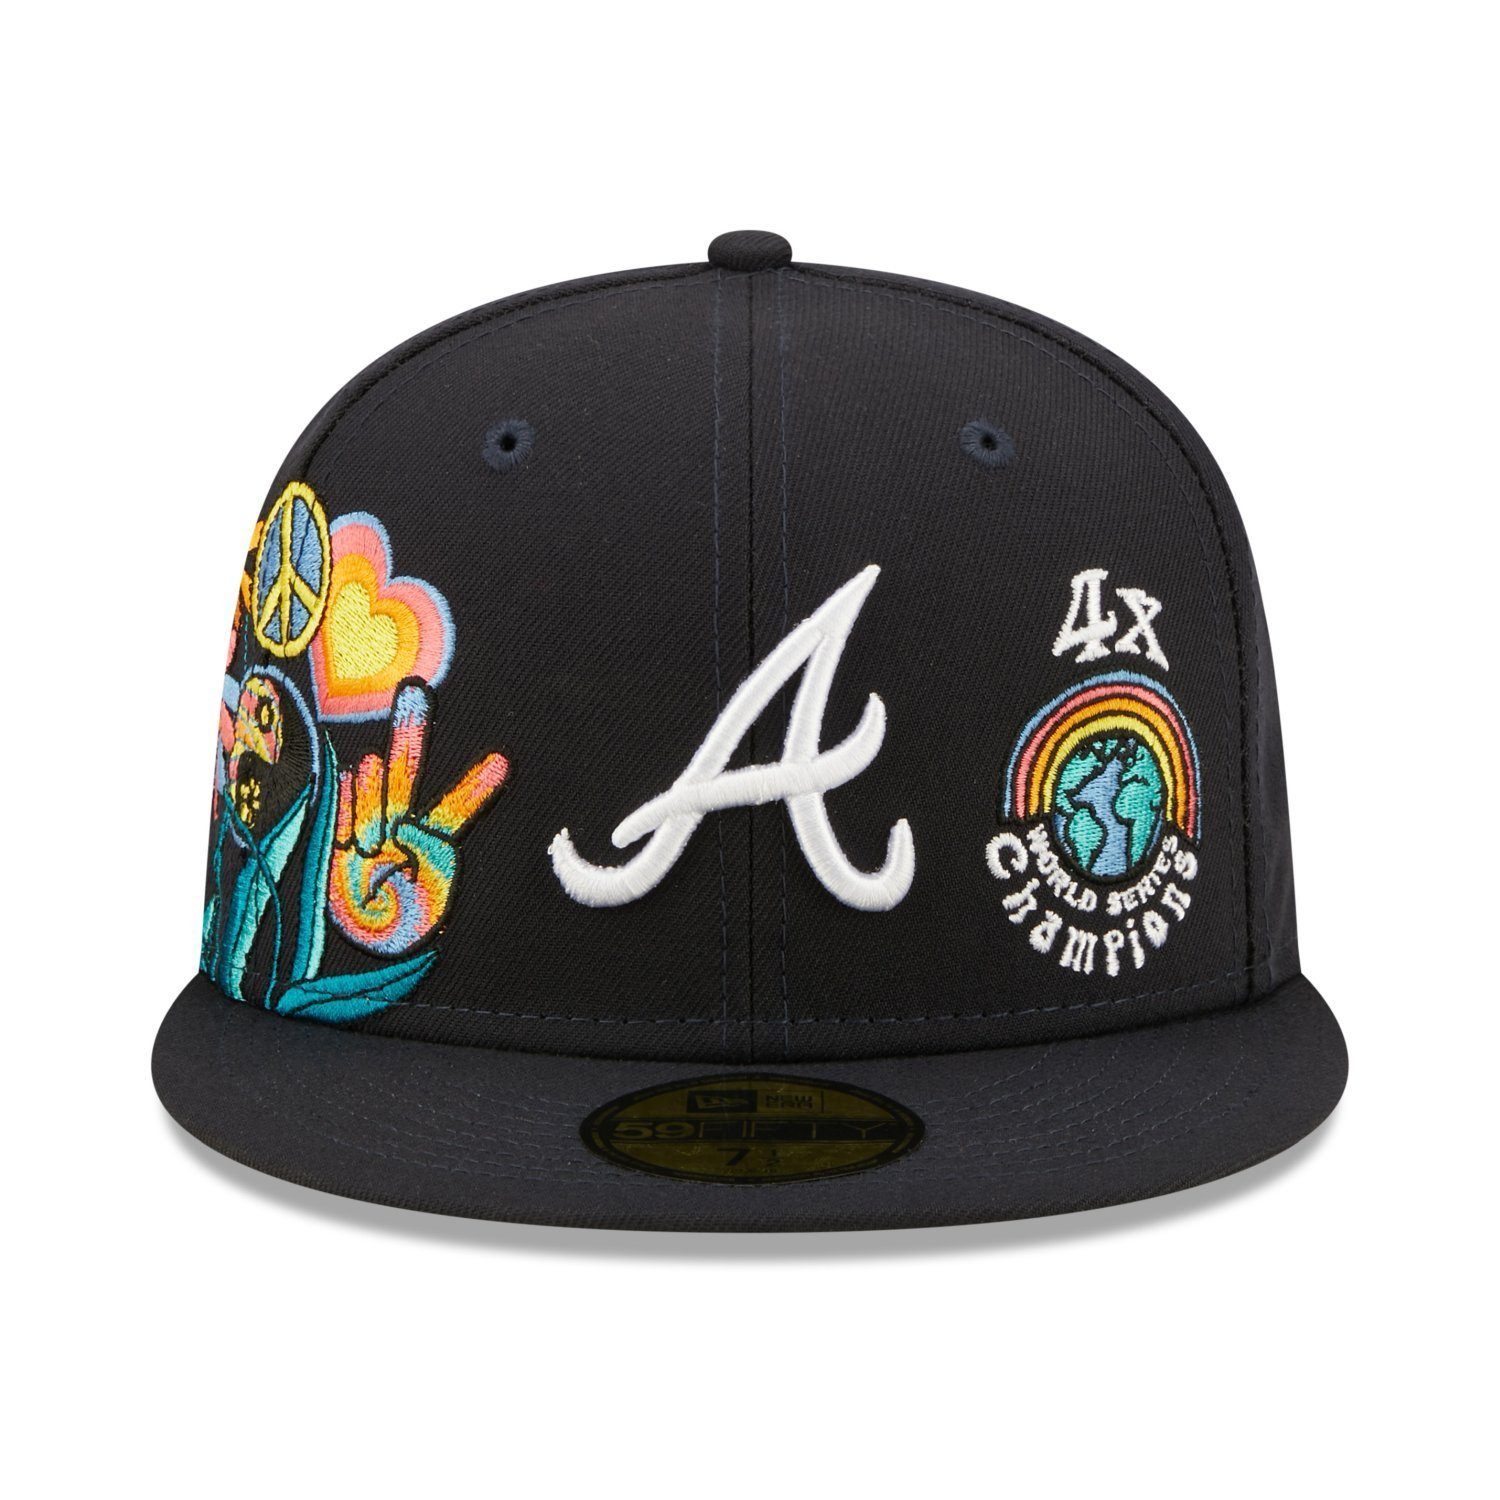 Fitted Atlanta Era 59Fifty Cap New Braves GROOVY